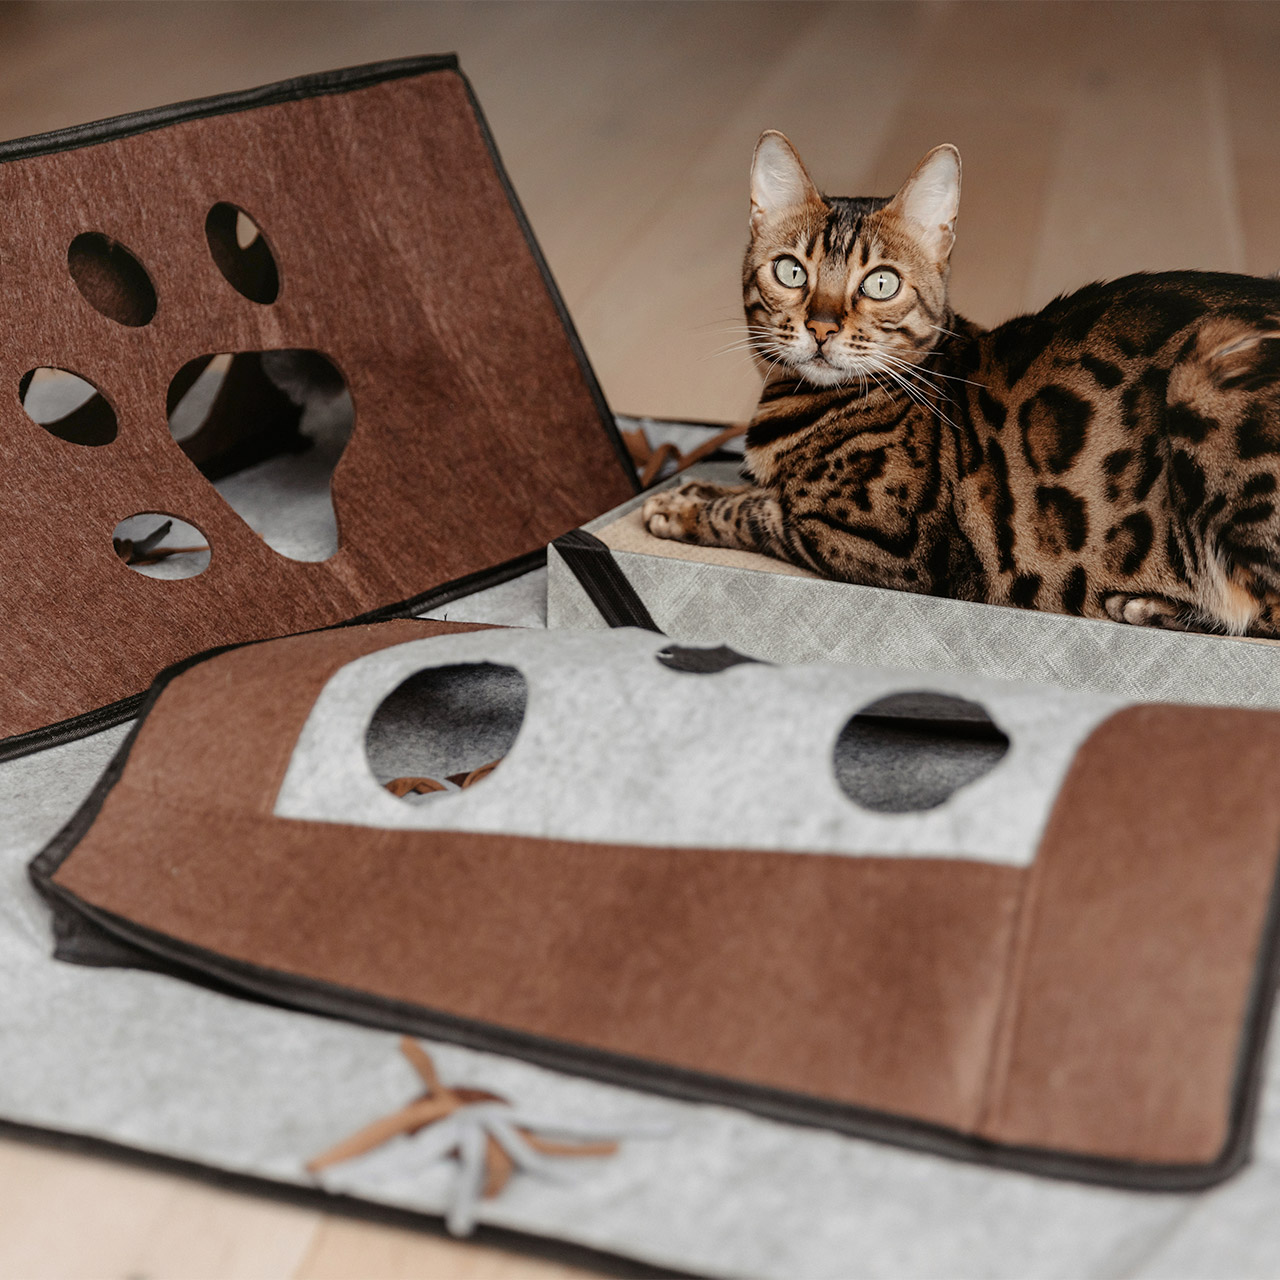 Play carpet XXL Activity for cats